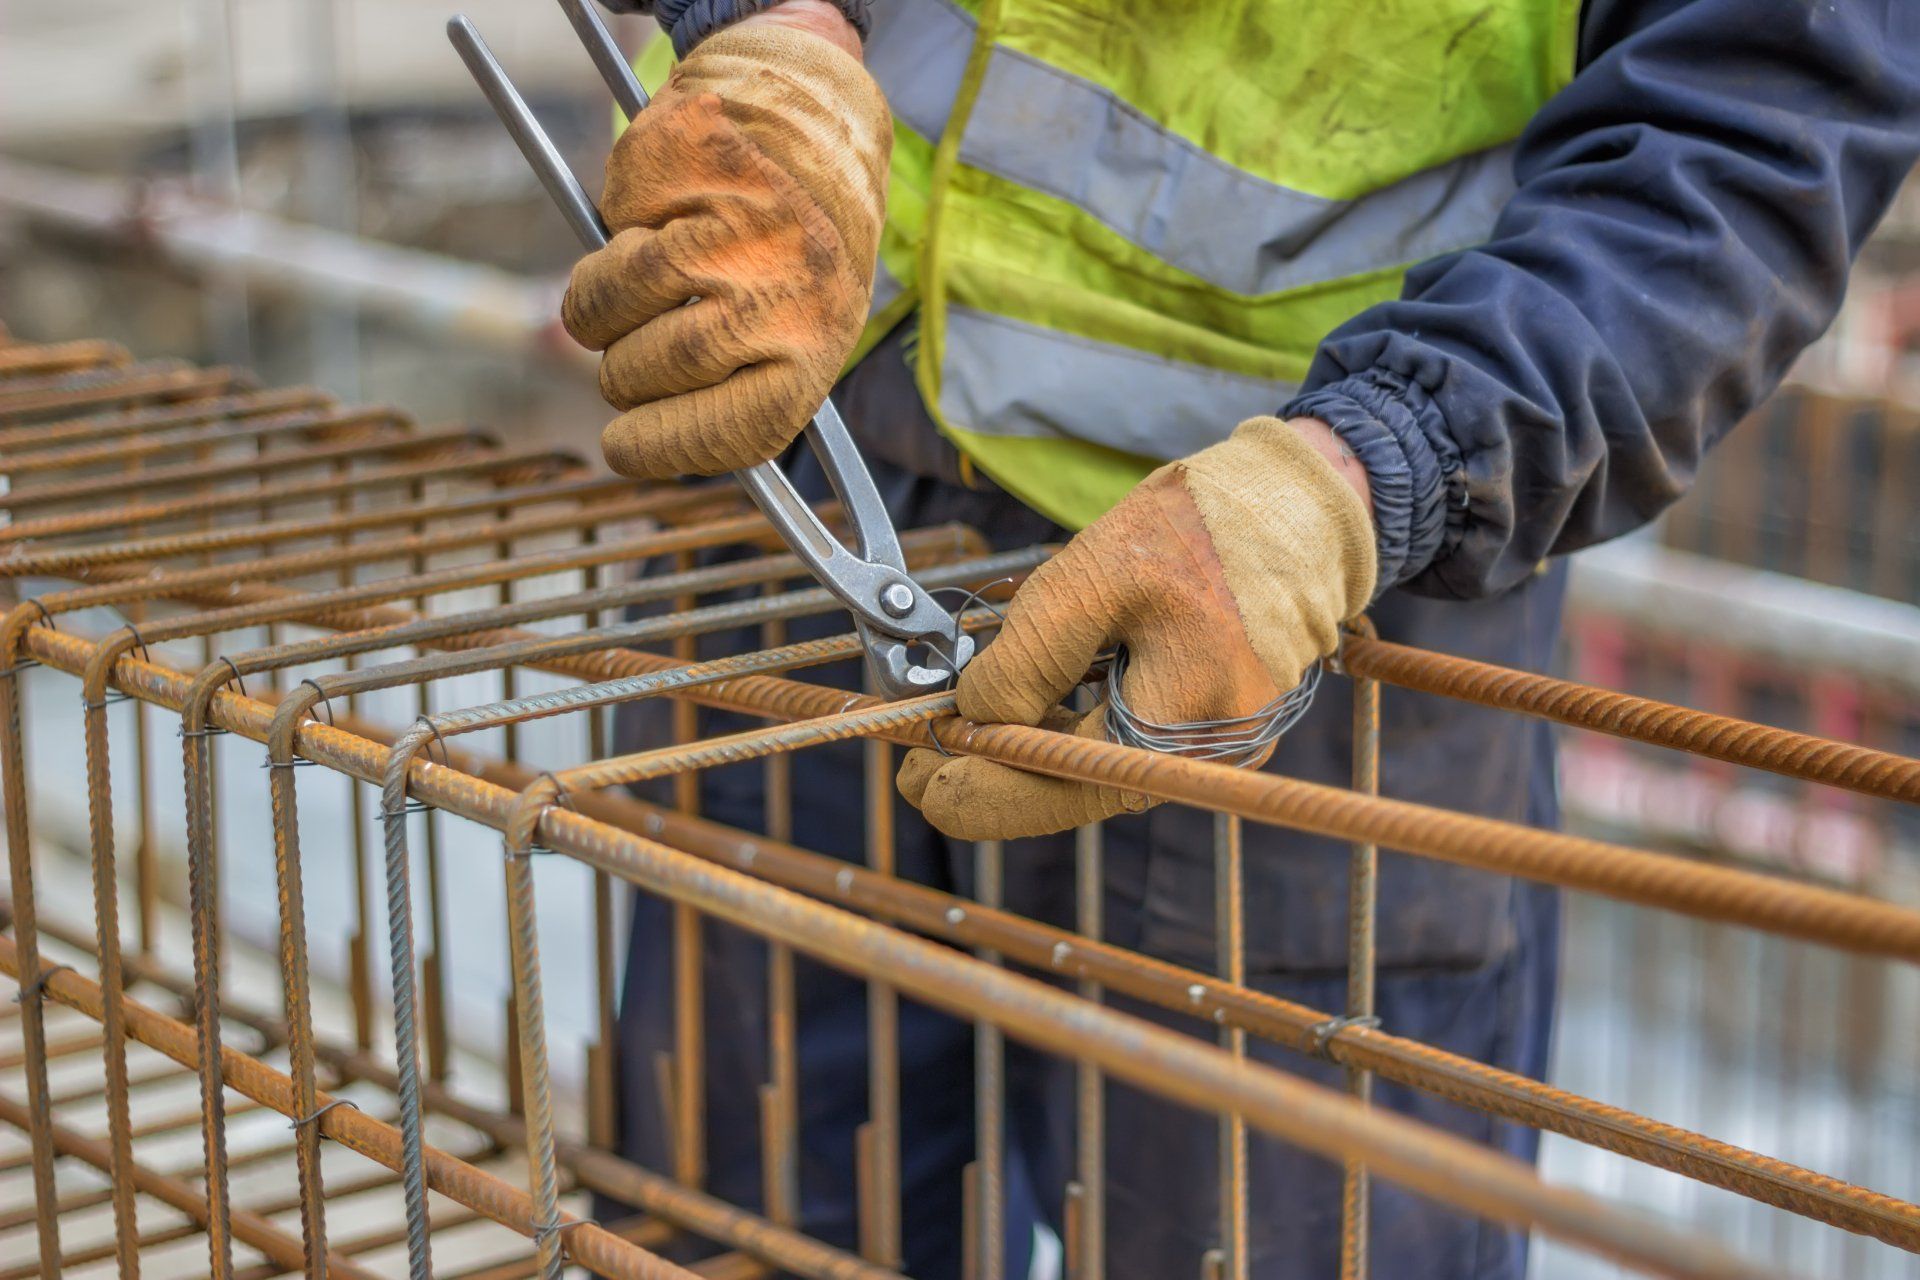 Workers hands using steel wire — Benny’s Concrete Formwork & Reinforcement in Northern Rivers, NSW